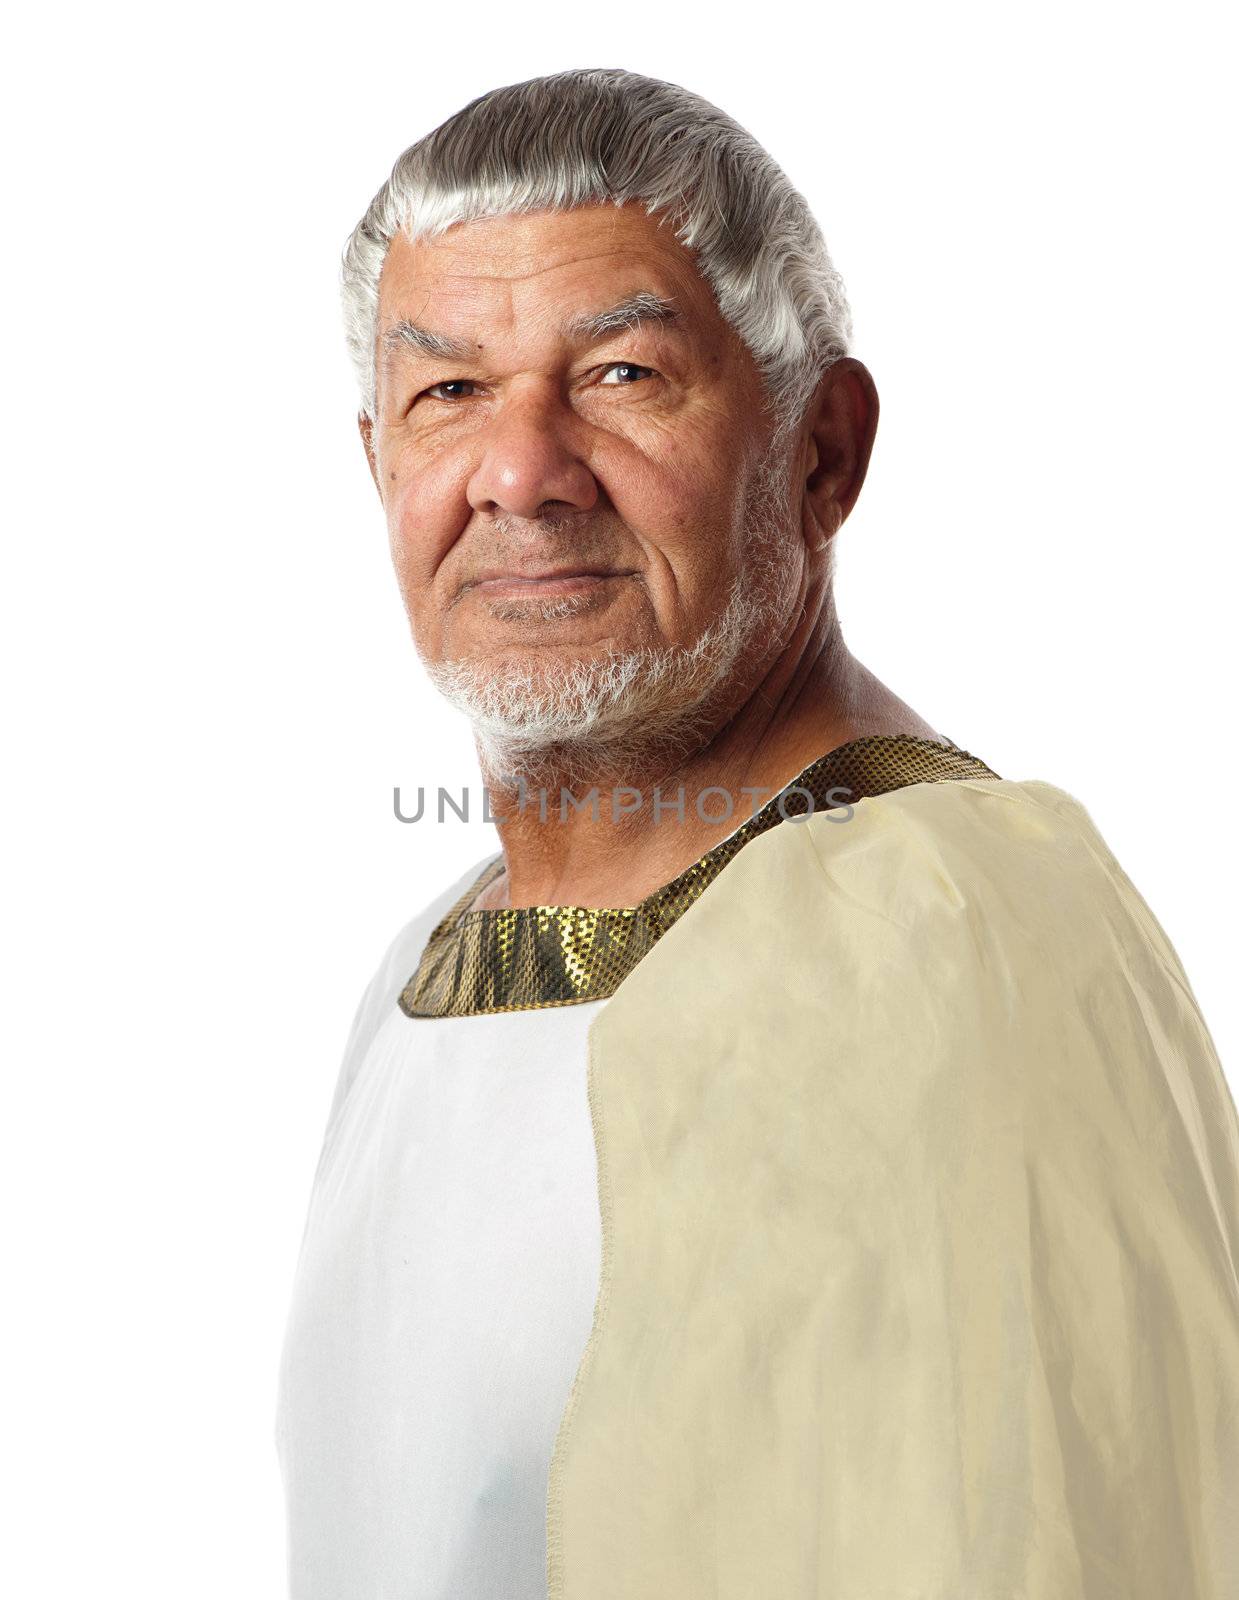 An old man in ancient garment resembles an emperor of days gone by.